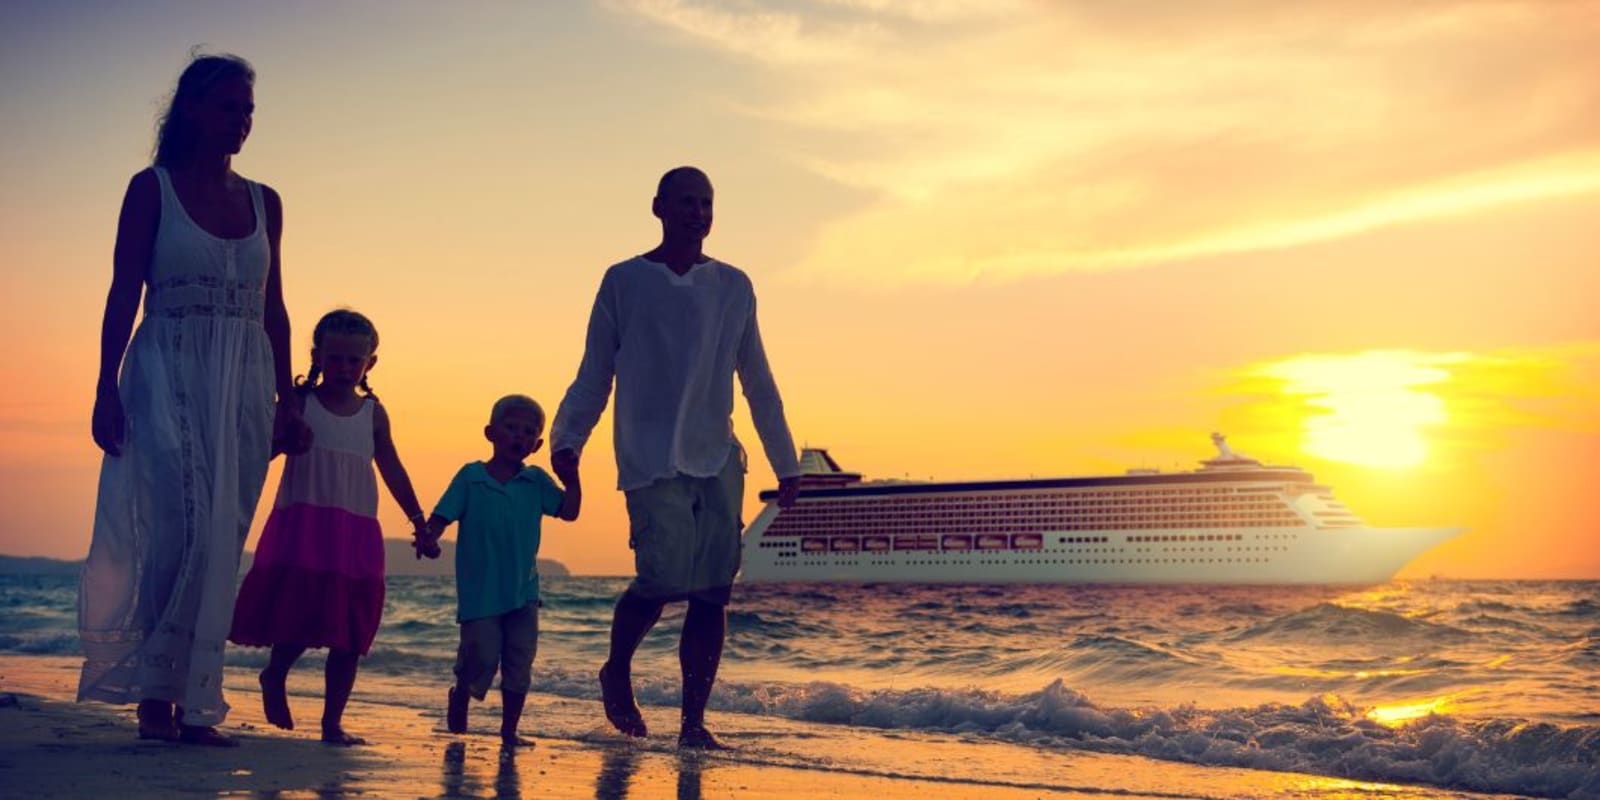 A family walking along a beach at sunset with a cruise ship in the background